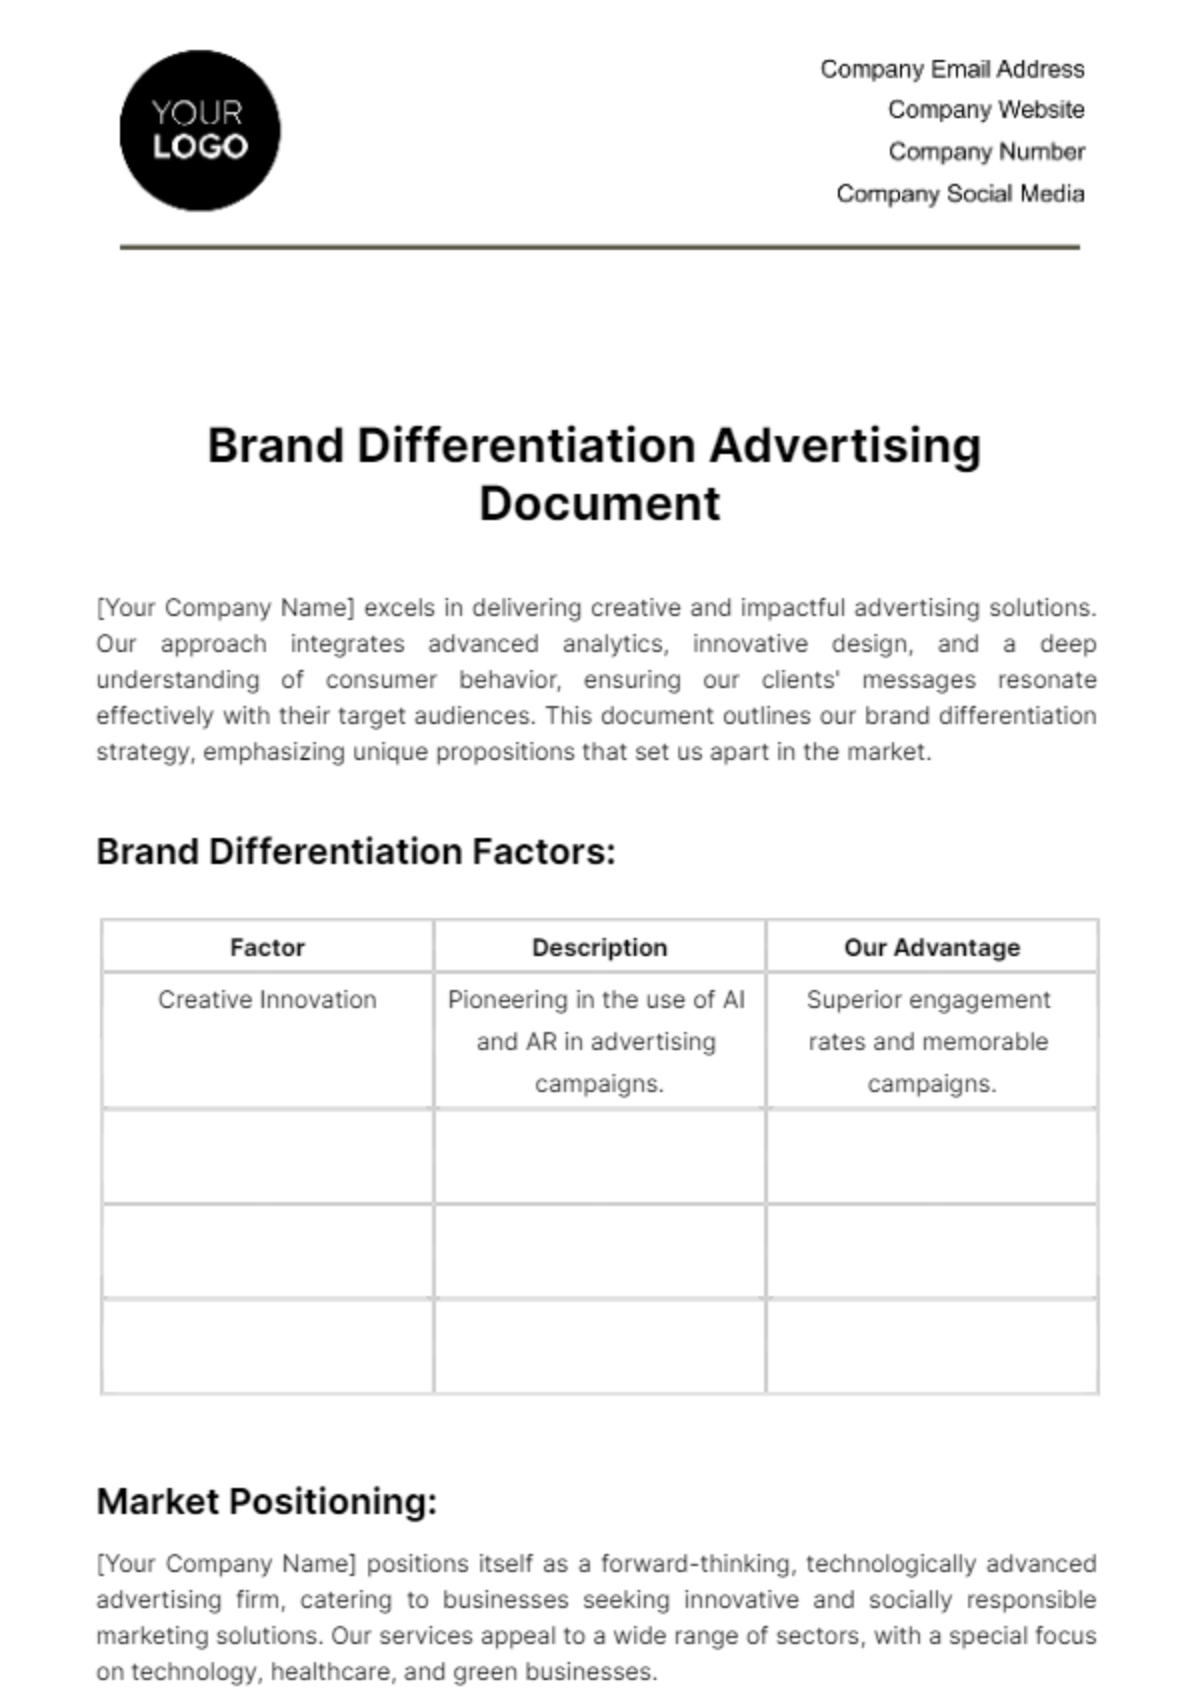 Free Brand Differentiation Advertising Document Template